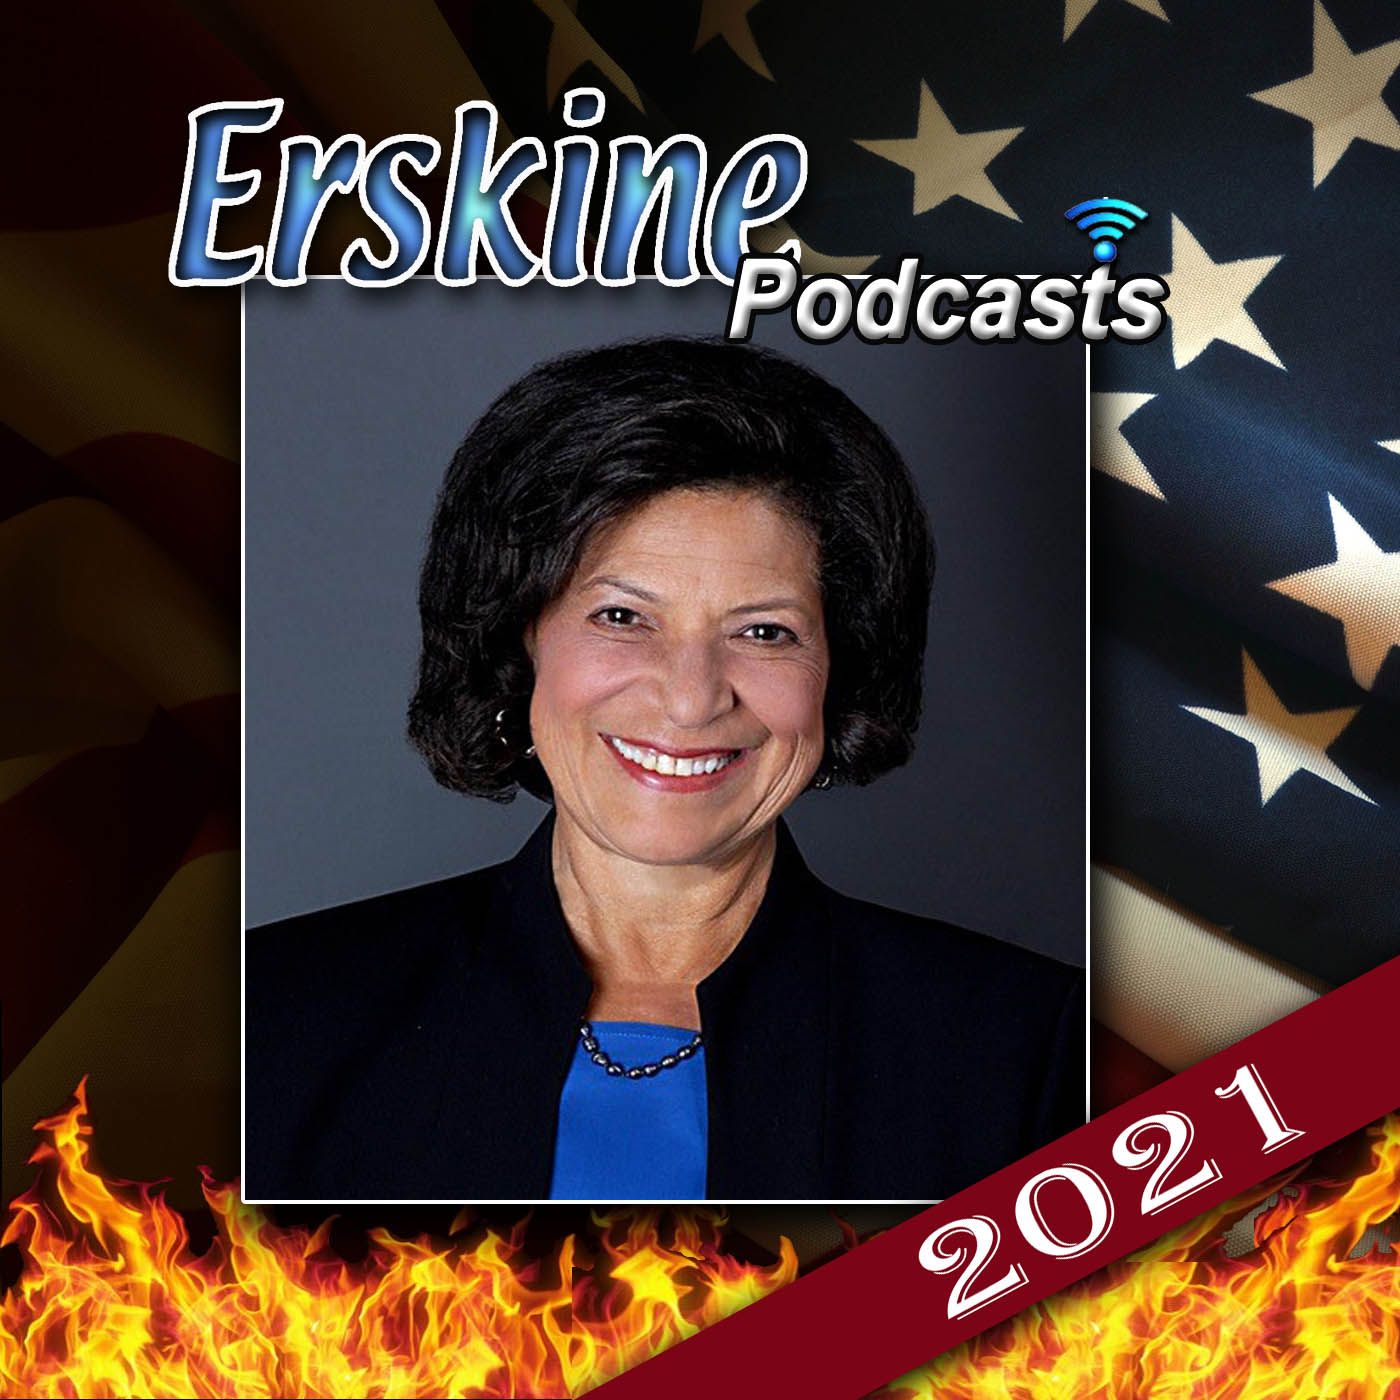 Dr Marilyn M Singleton - COVID-19 mandates, safety, and transforming America (ep #10-23-21)